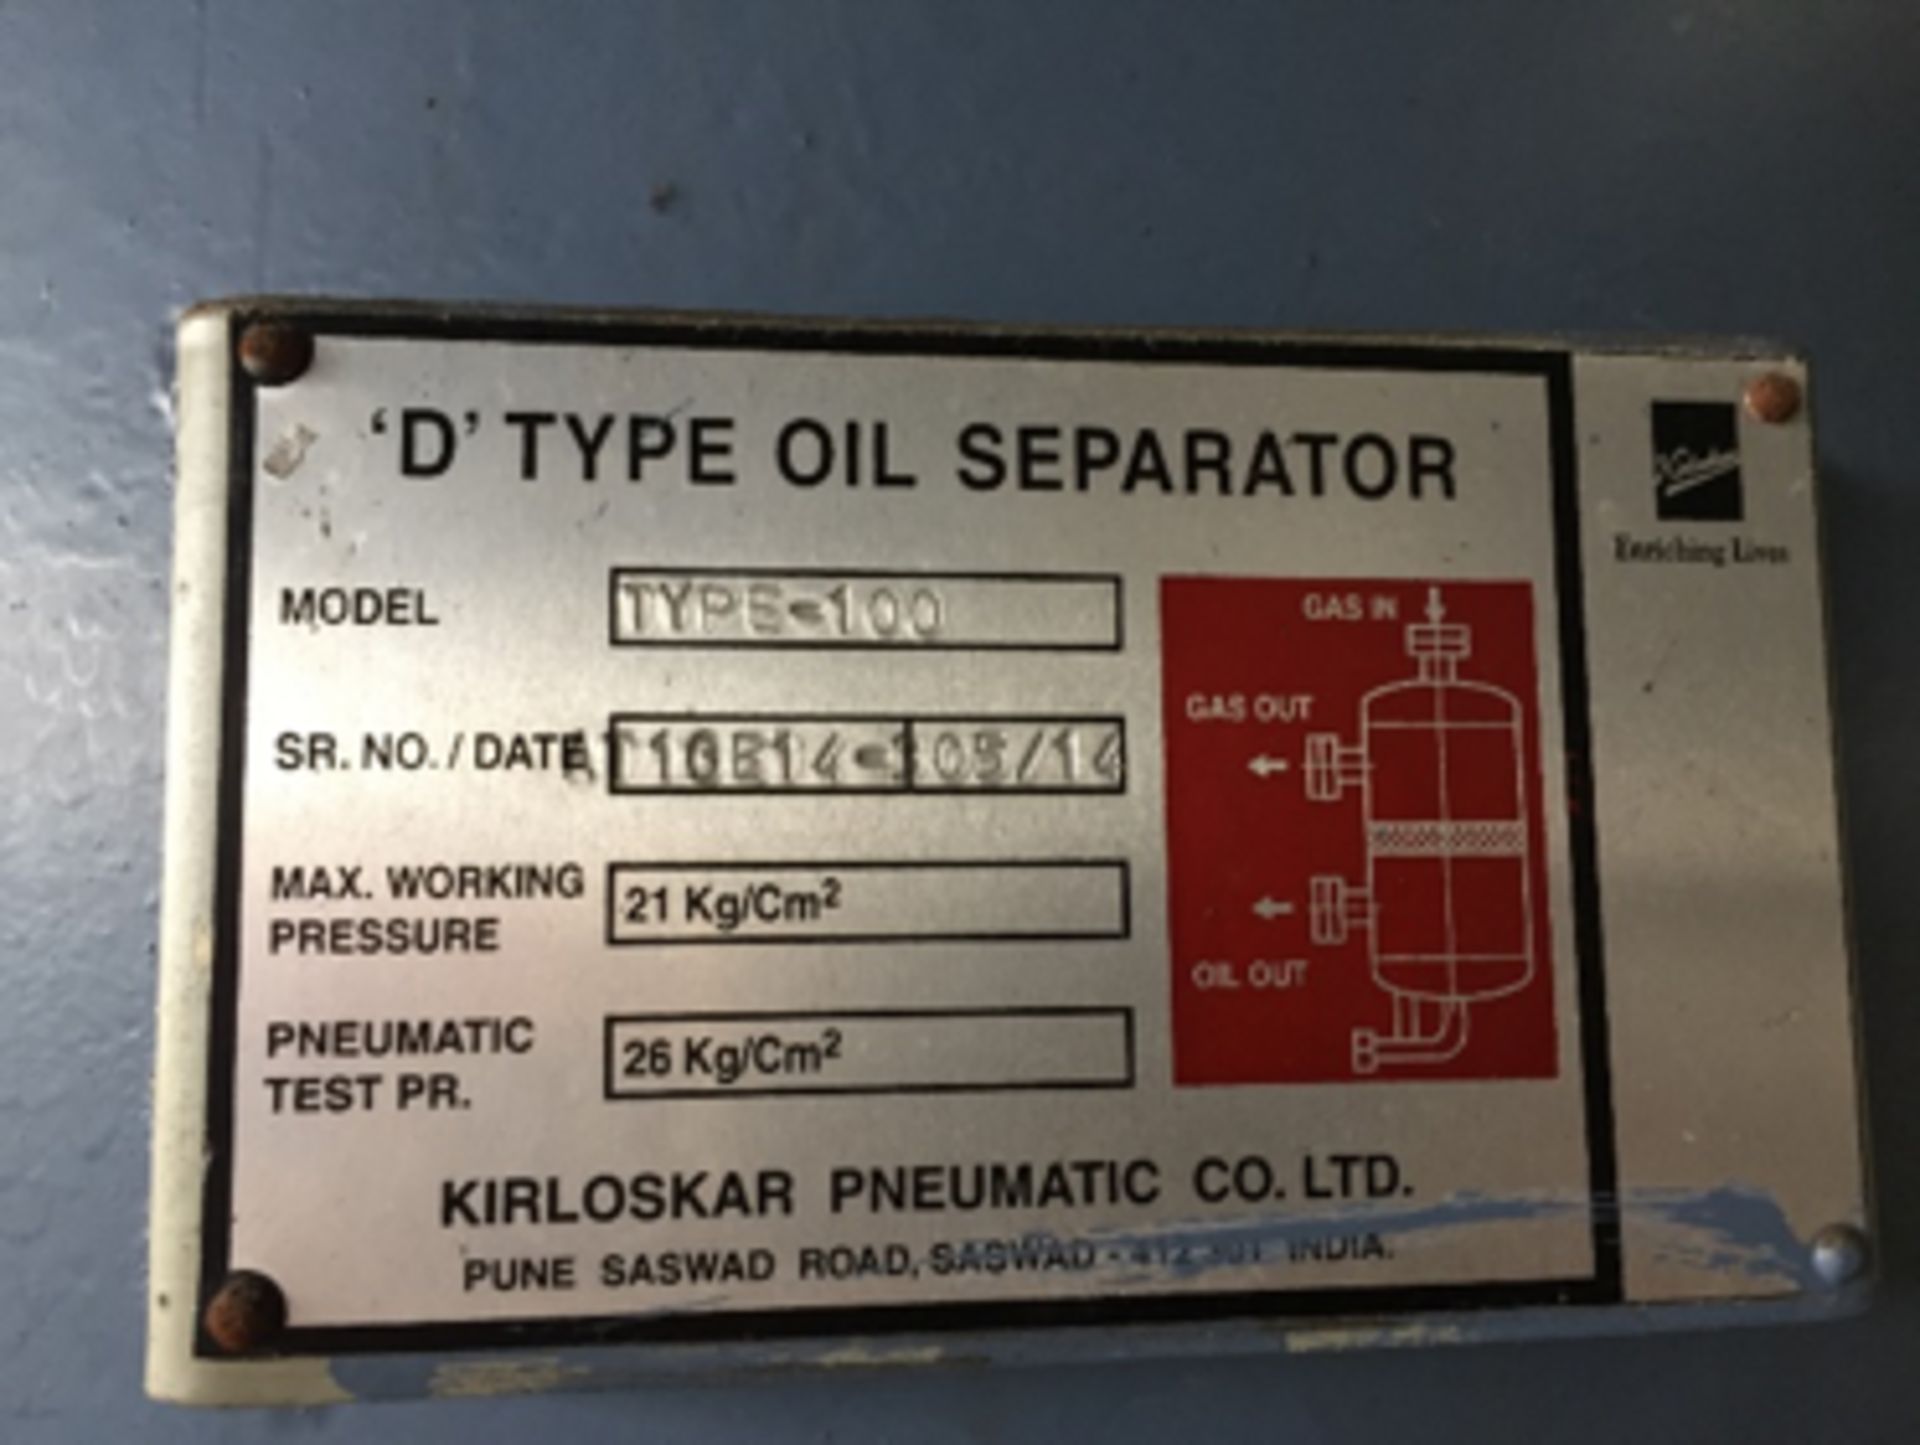 D-Type oil separator - Image 2 of 2